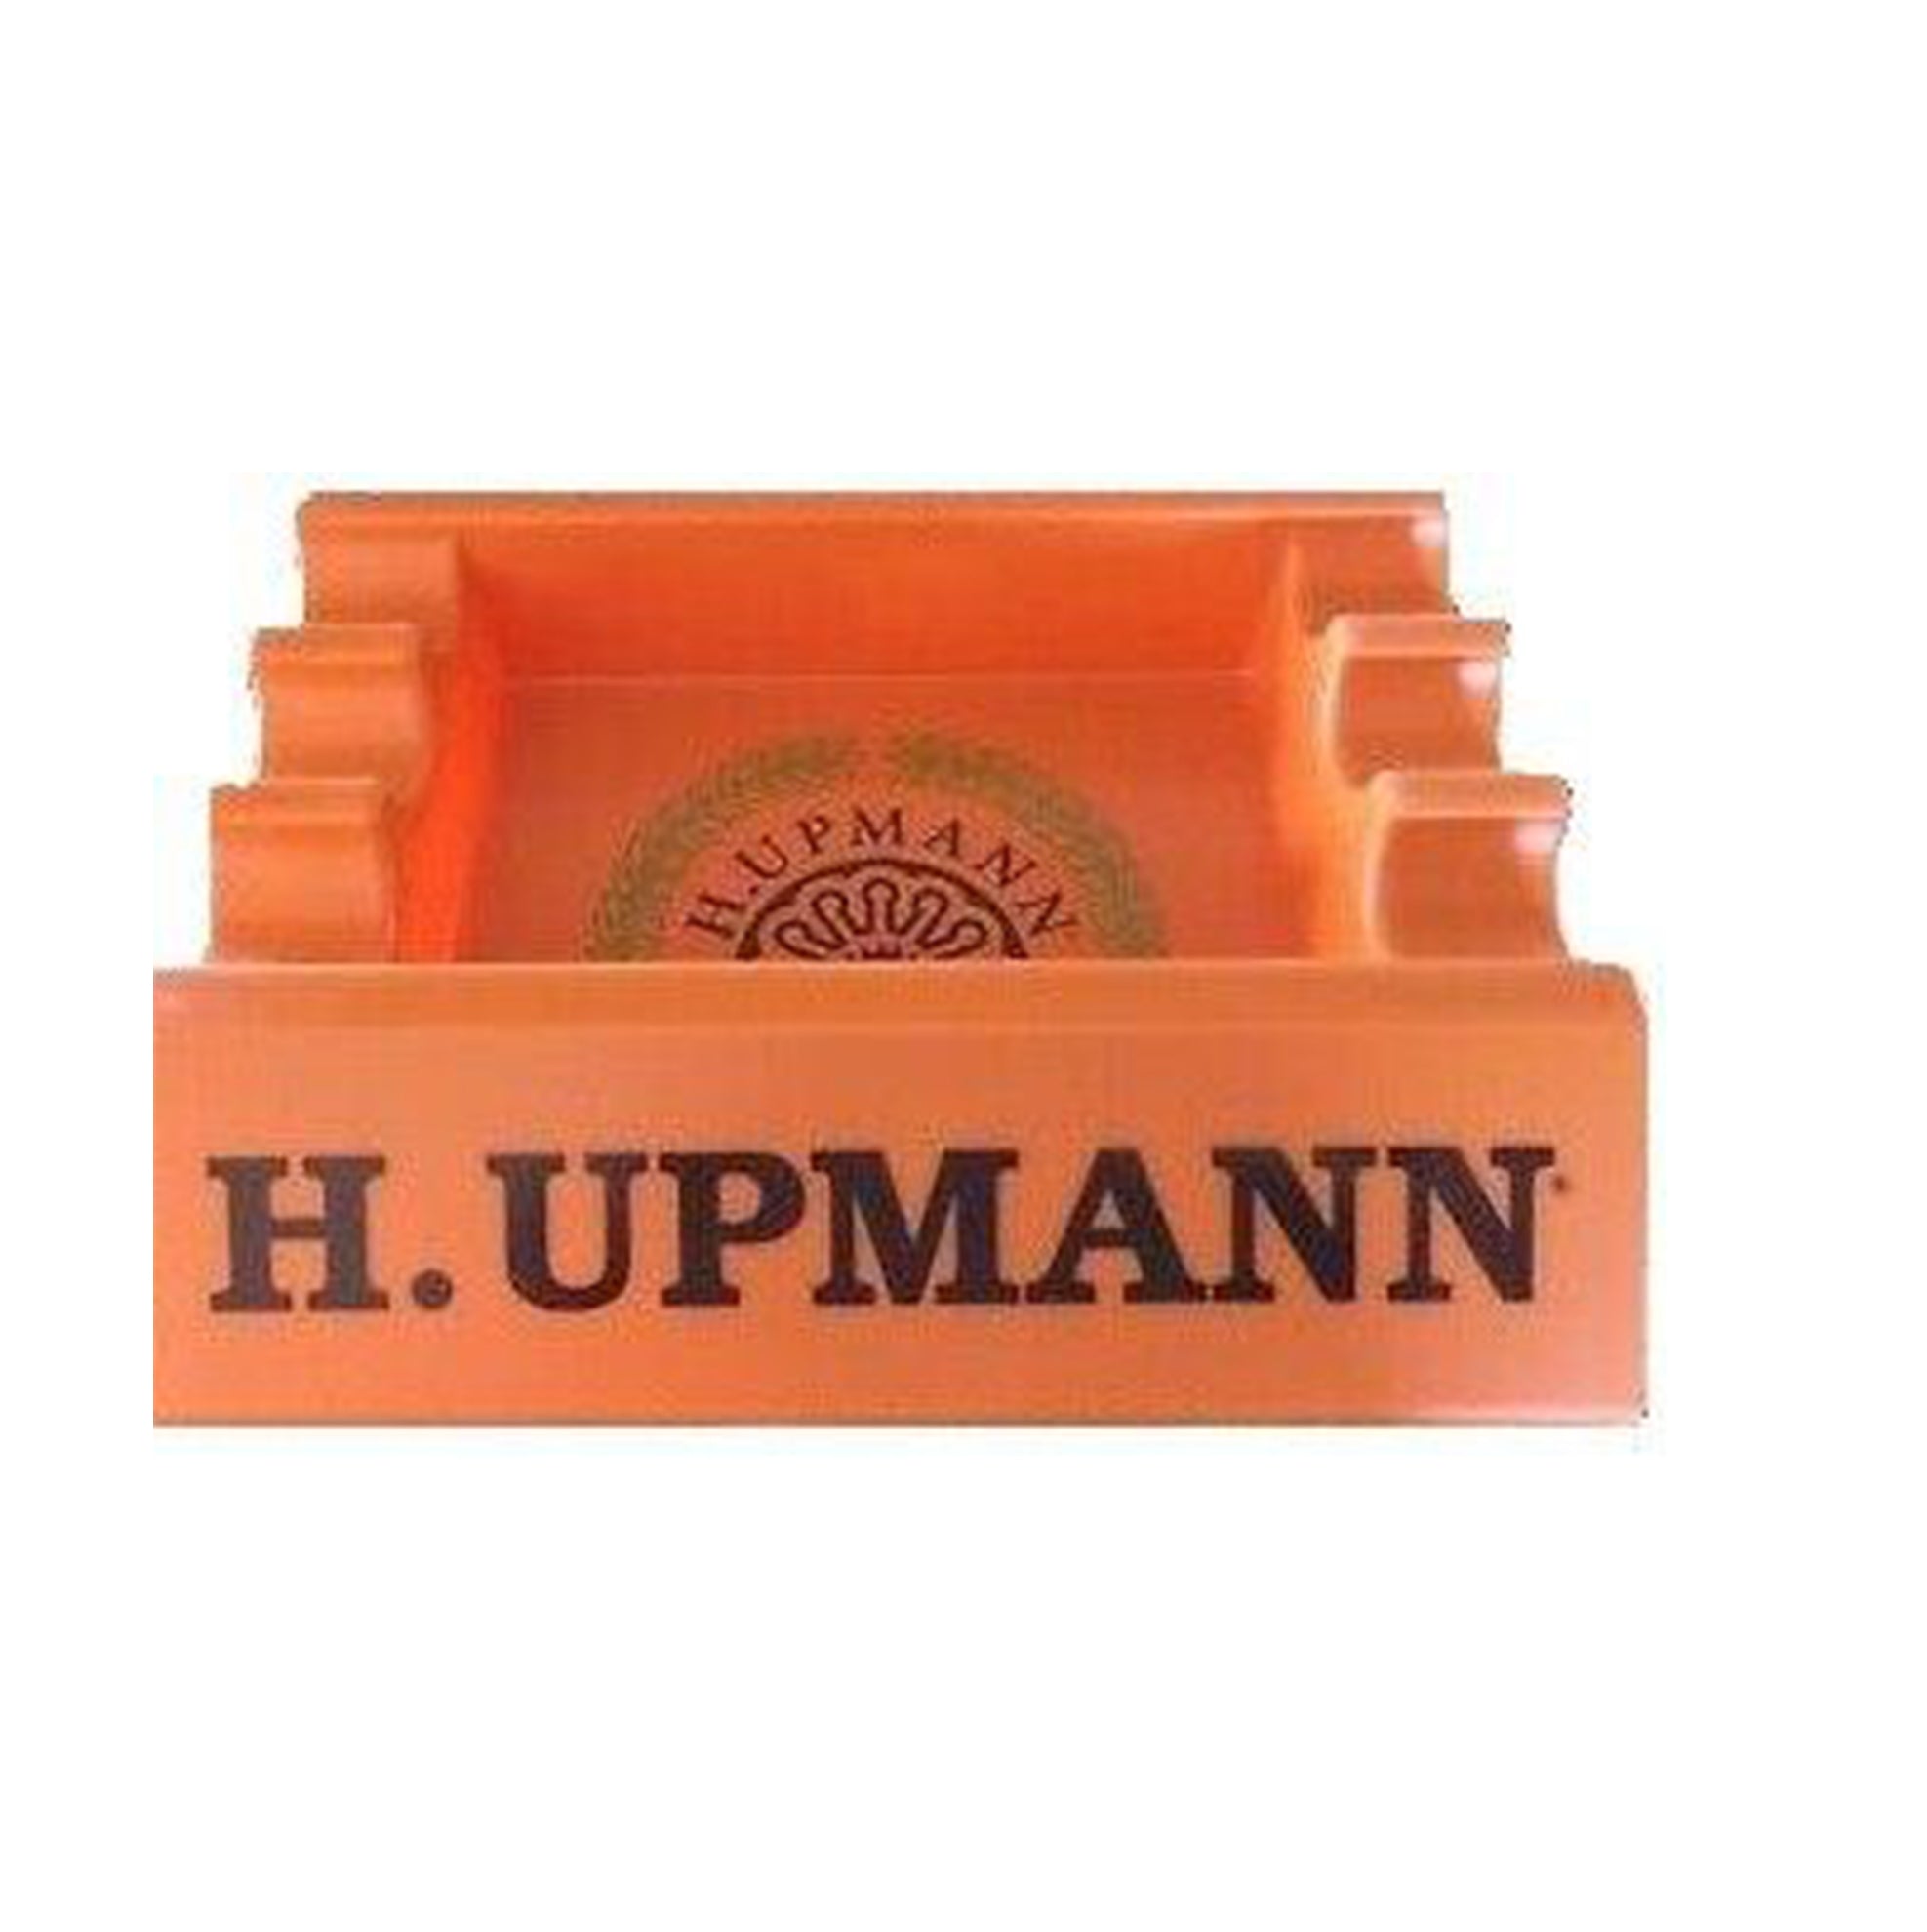 H. UPMANN  Indoor and Outdoor Large Ashtray for Cigars